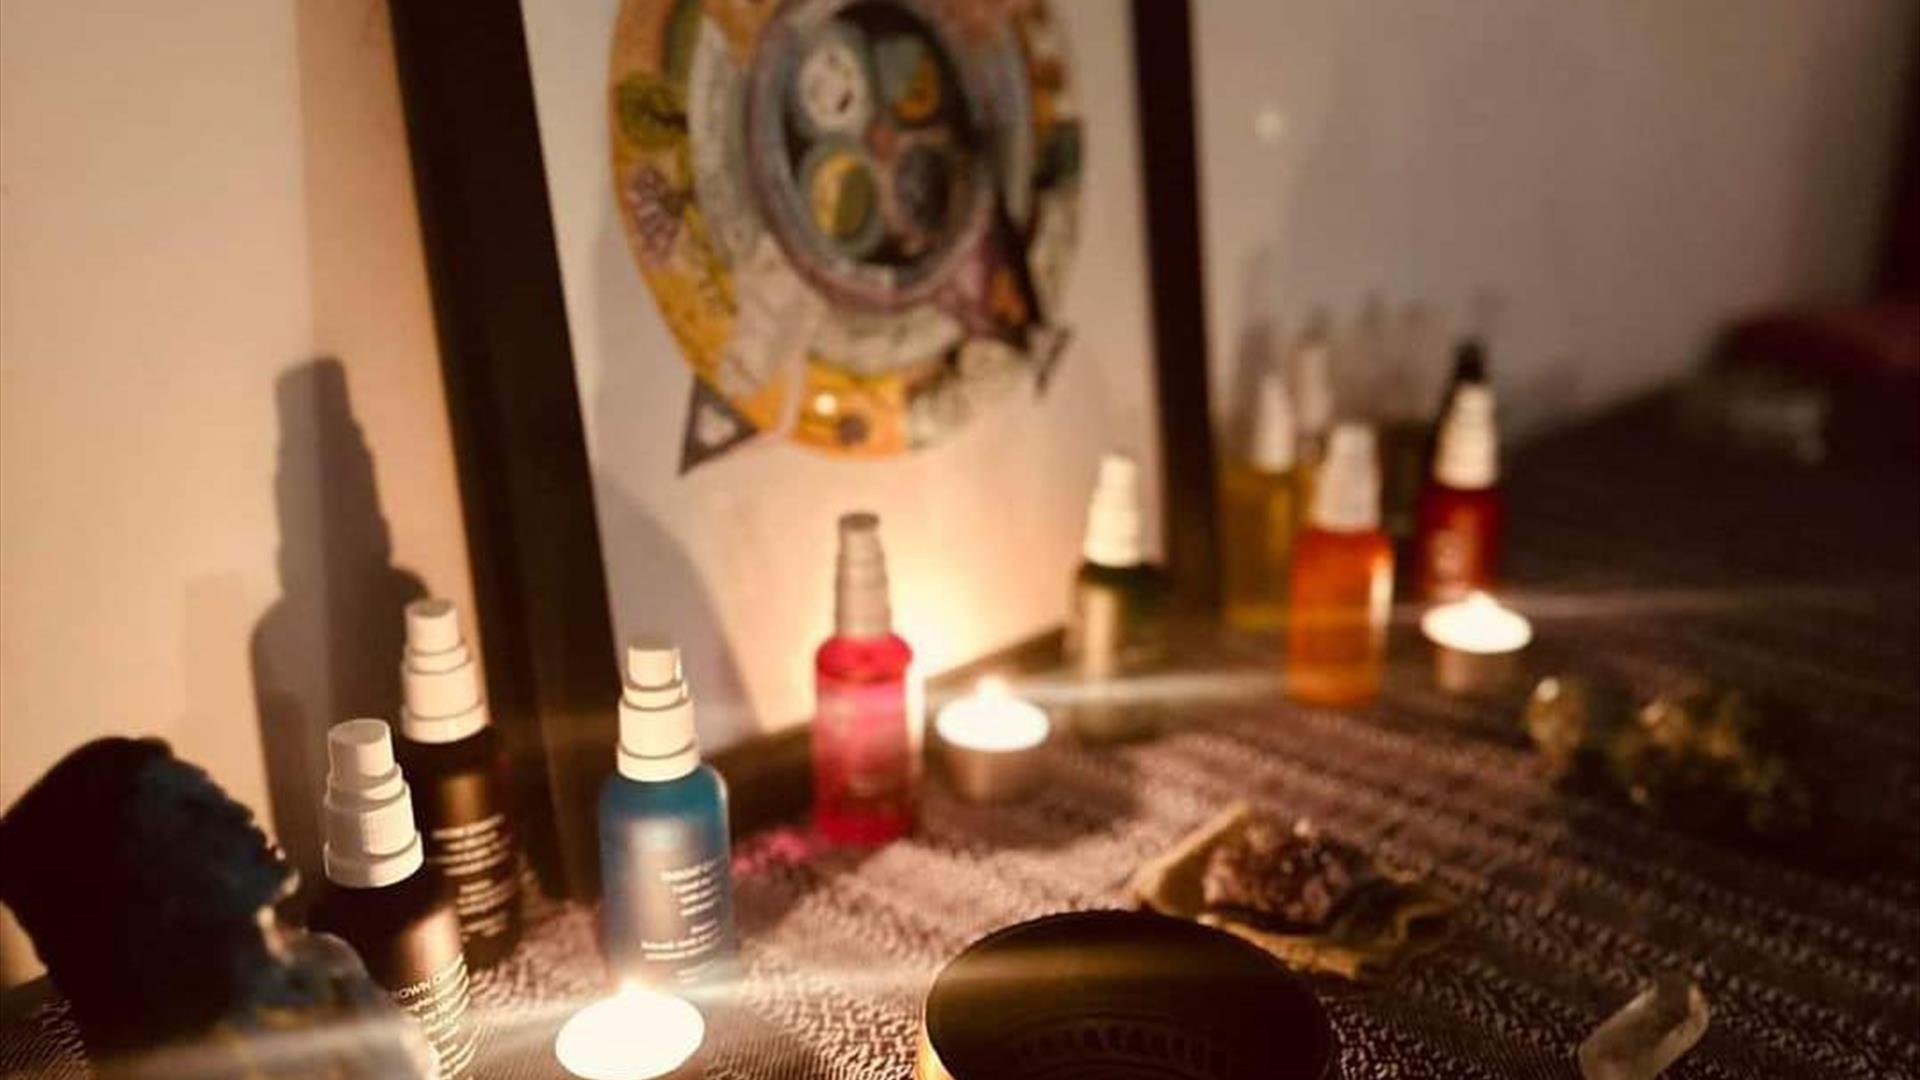 Image is of a treatment room burning candles and incense